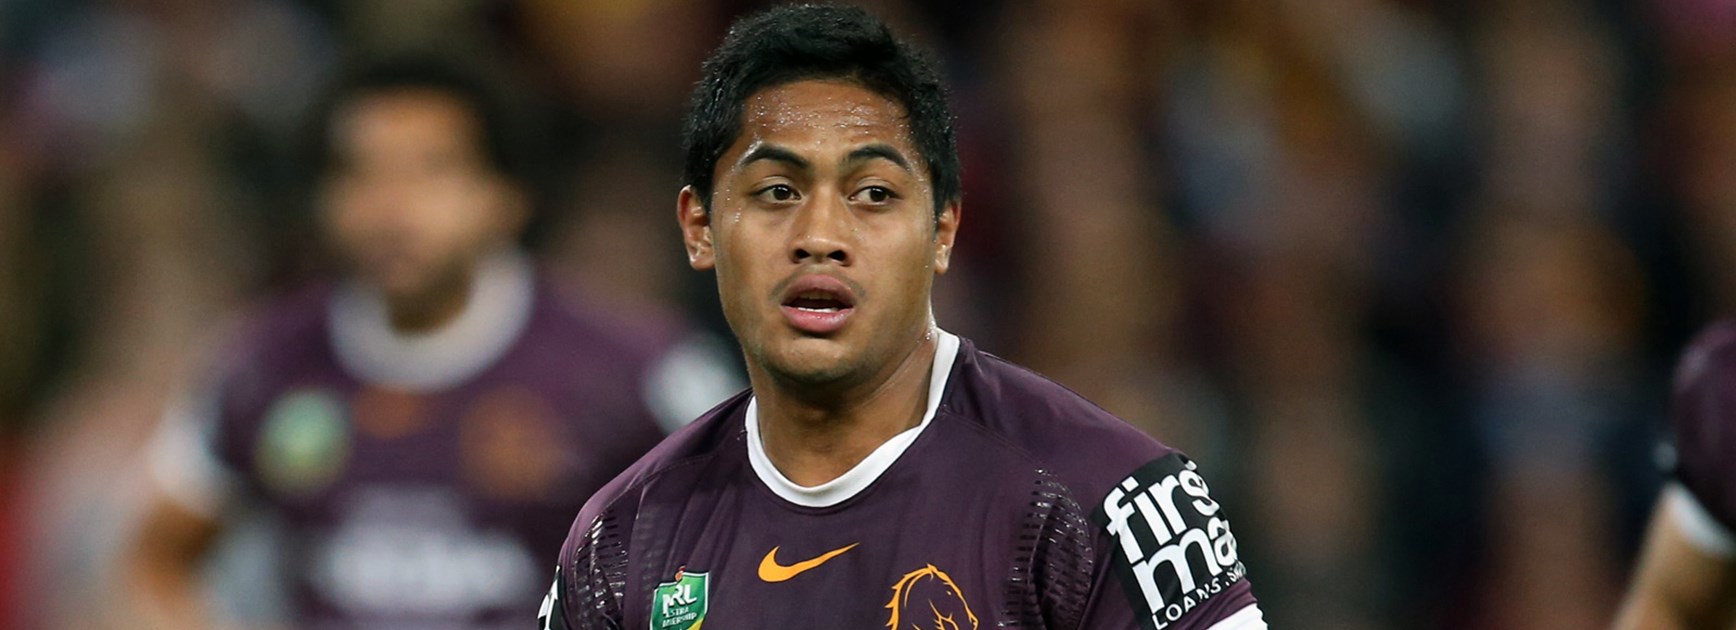 Broncos halves Anthony Milford and Ben Hunt are growing as a partnership, complementing each other perfectly.